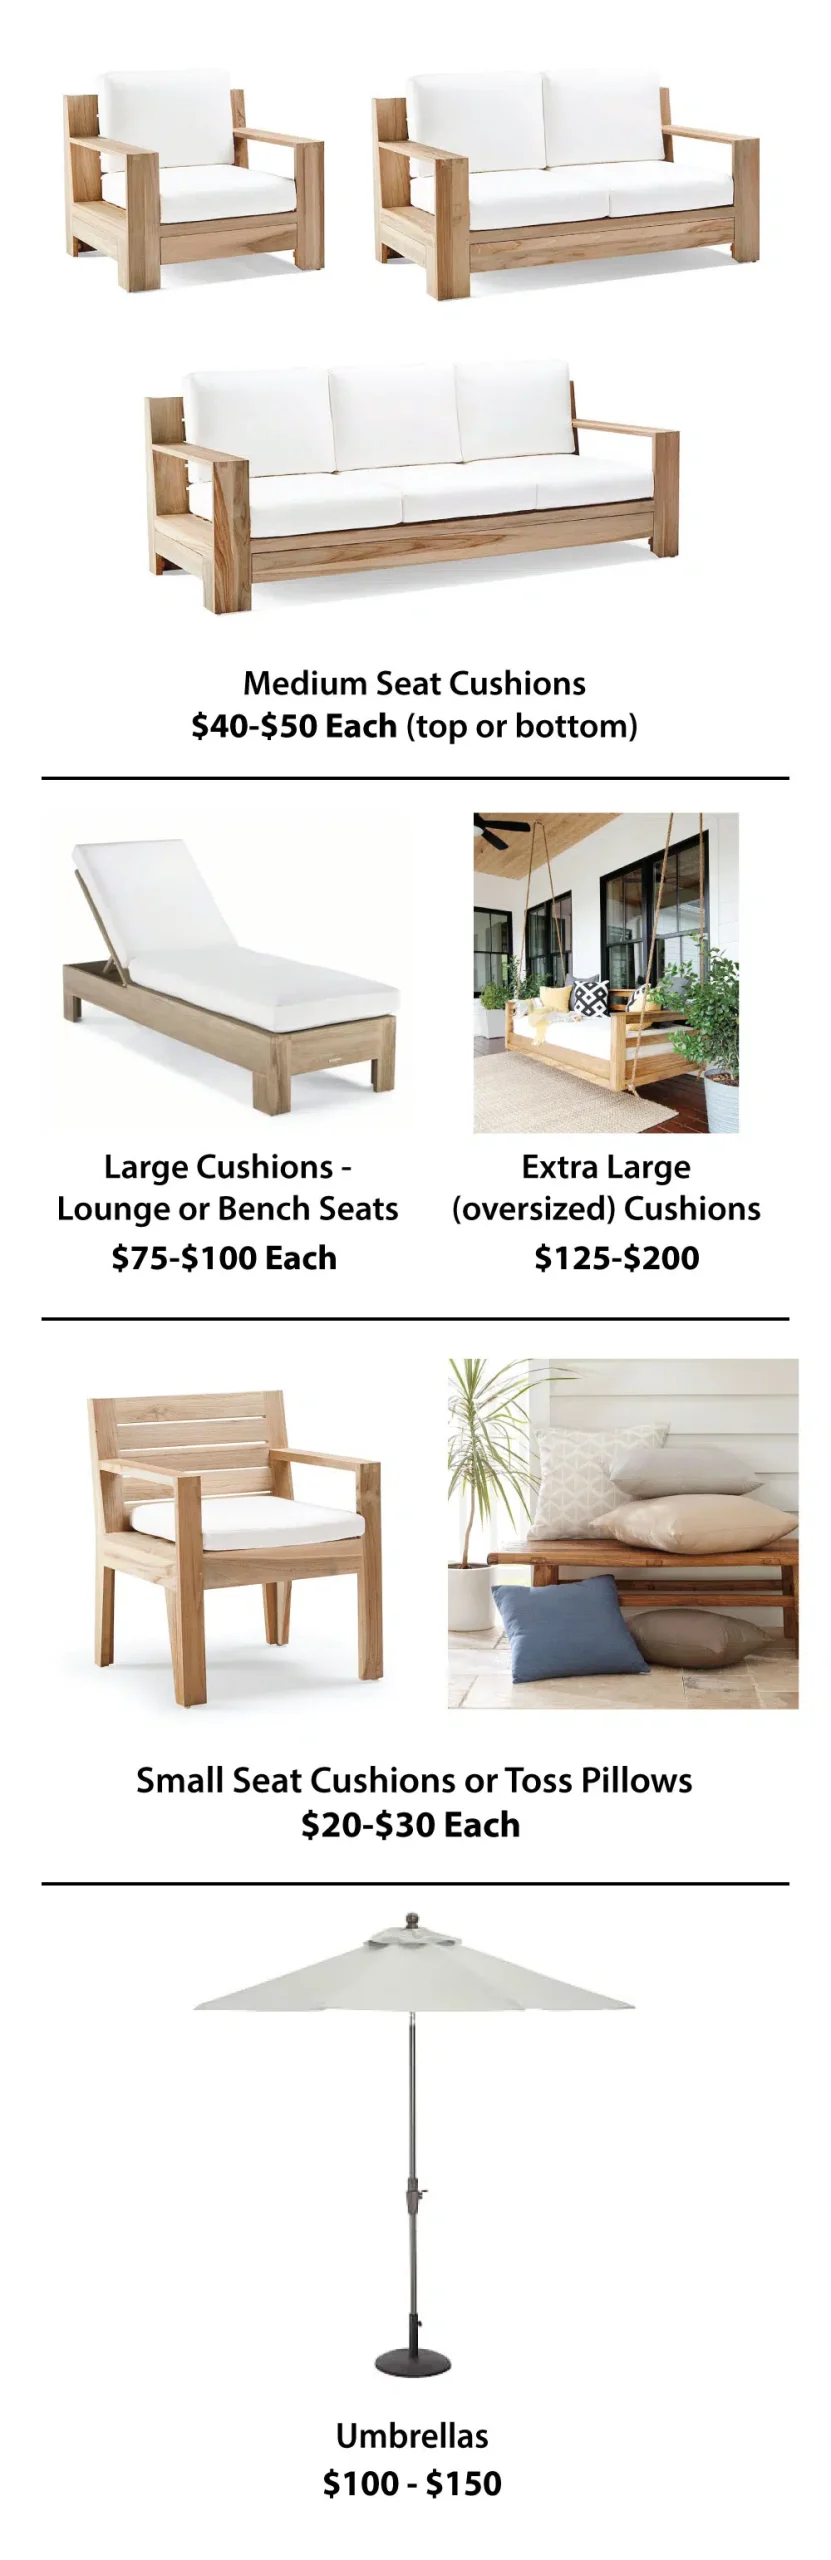 OUTDOOR CUSHIONS PRICING SCALED.JPG SCALED